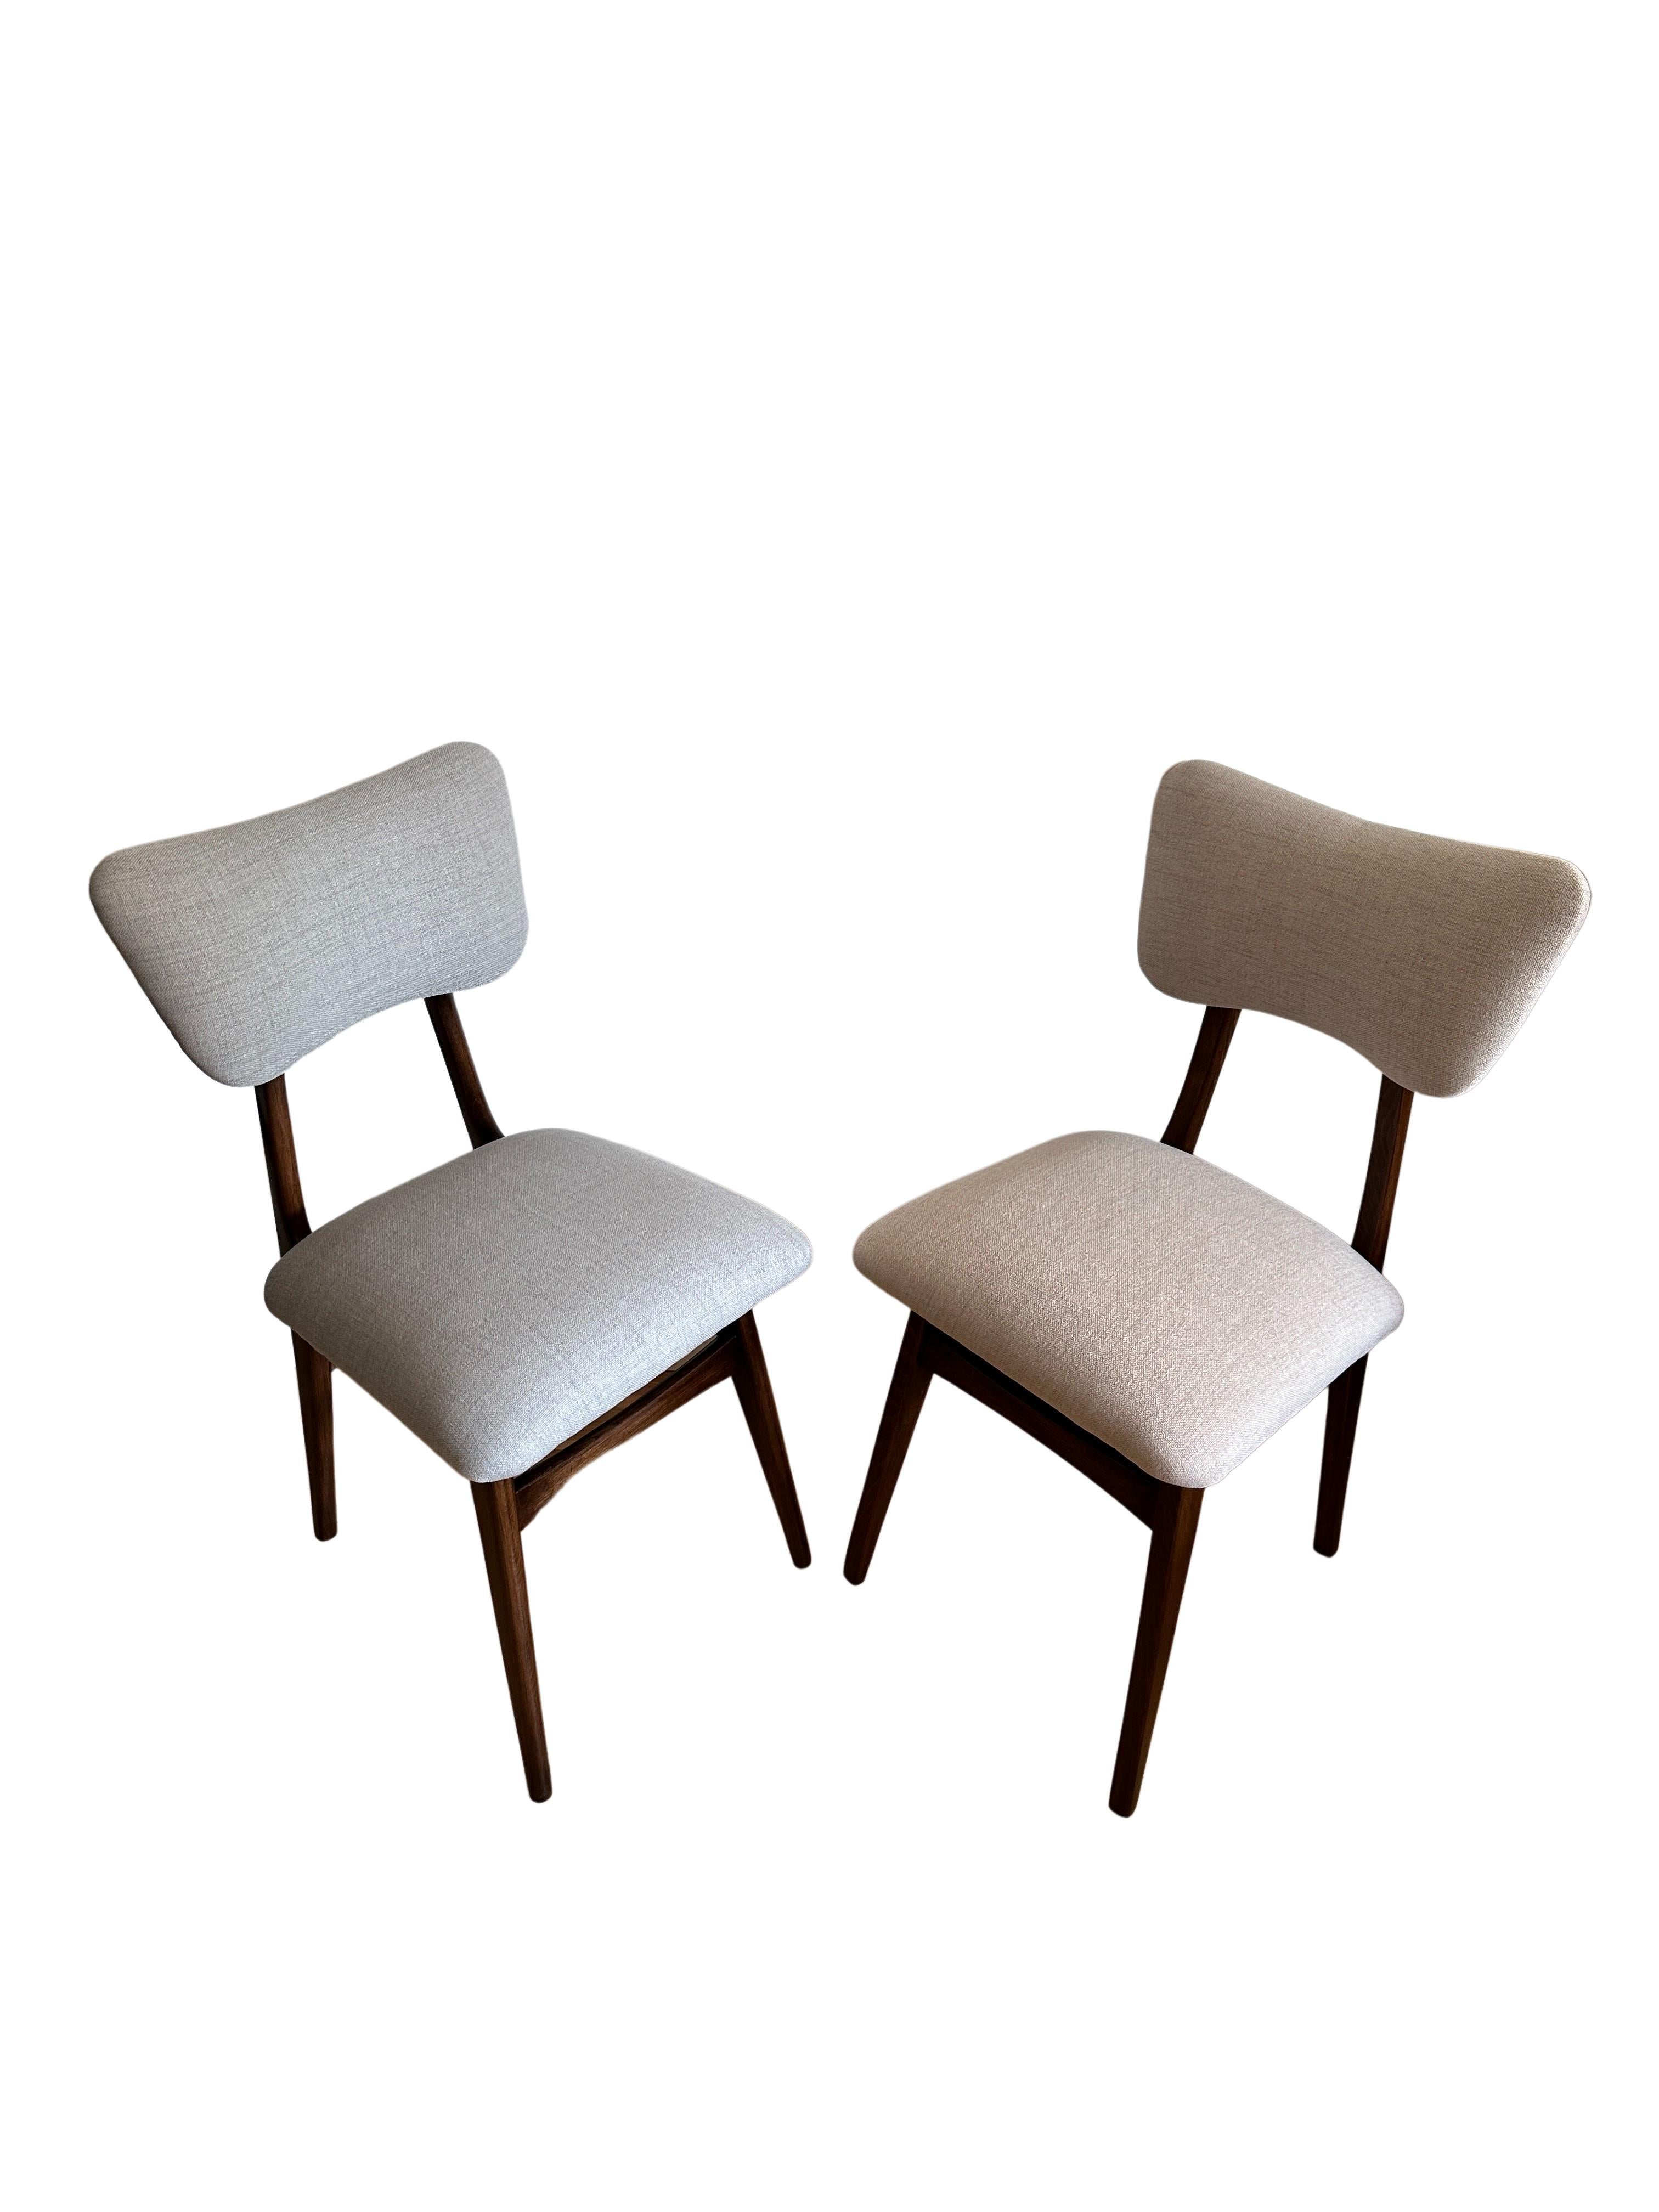 Unique set of two chairs manufactured in Poland in the 1960s, designed by Rajmund Halas. 

The upholstery is made of fabric with an interesting structure of thickly woven canvas, nice and soft to the touch. The fabric is covered with a protective